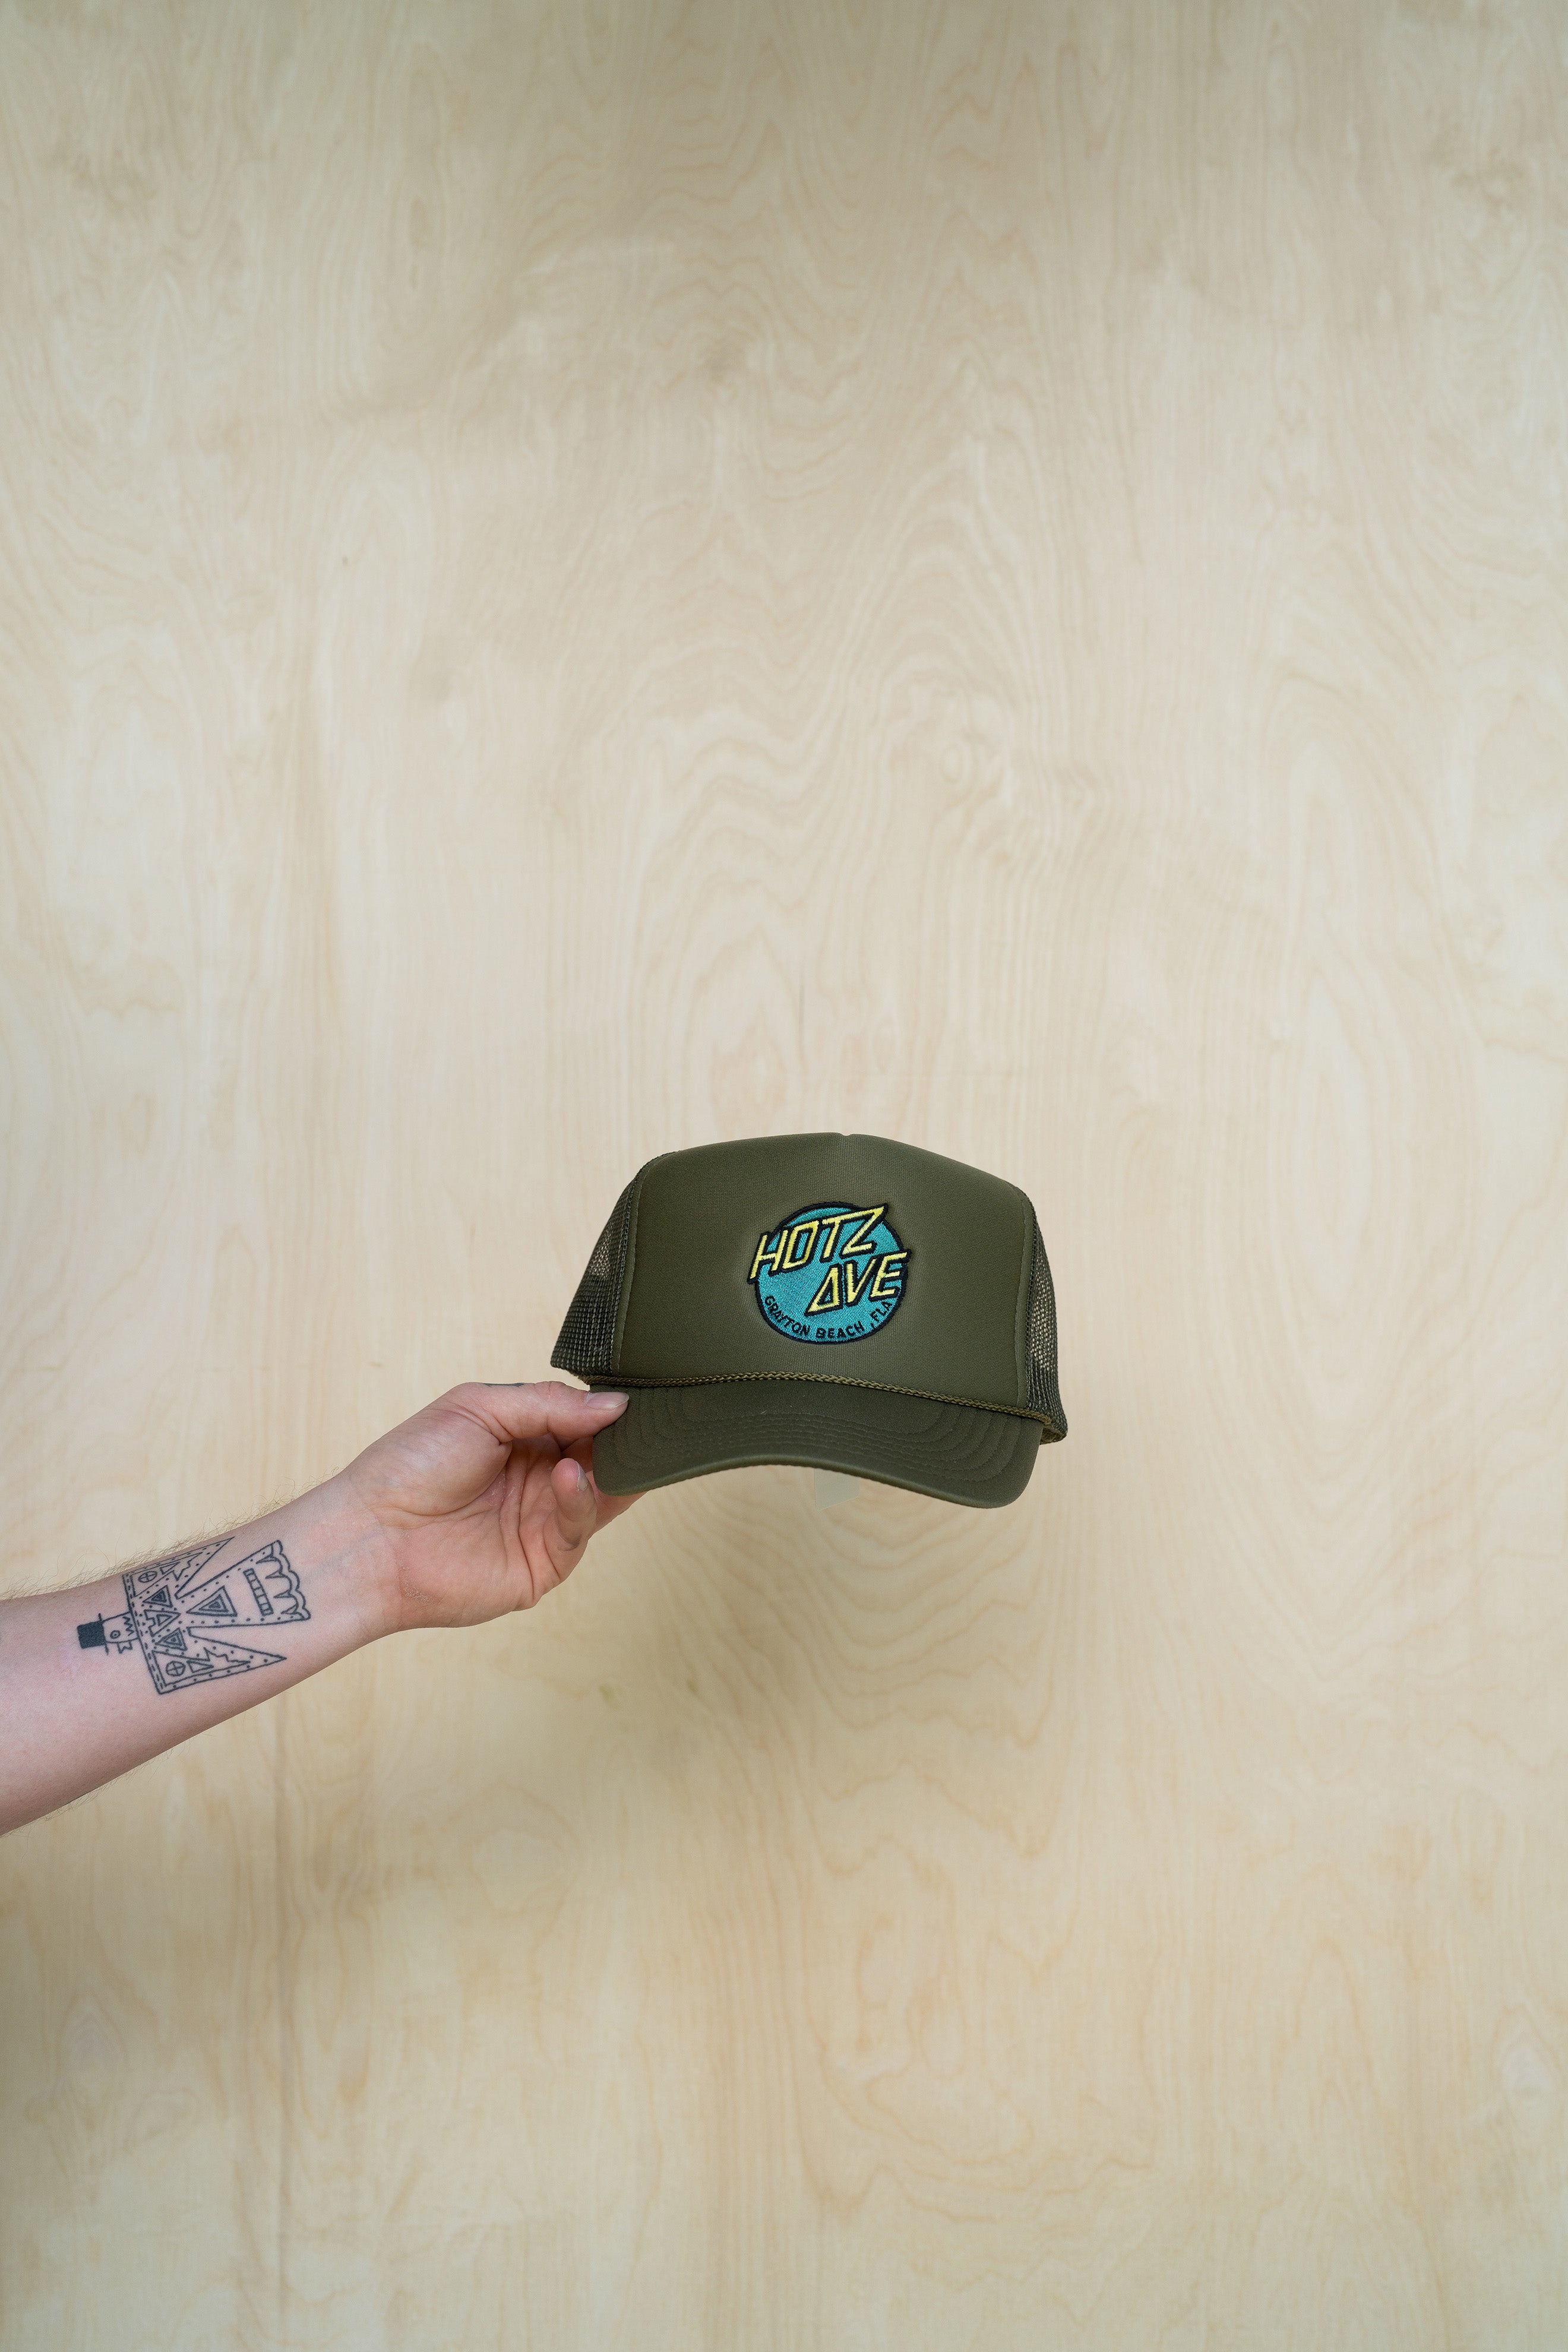 Embroidered Trucker Hotz Ave Hat Olive